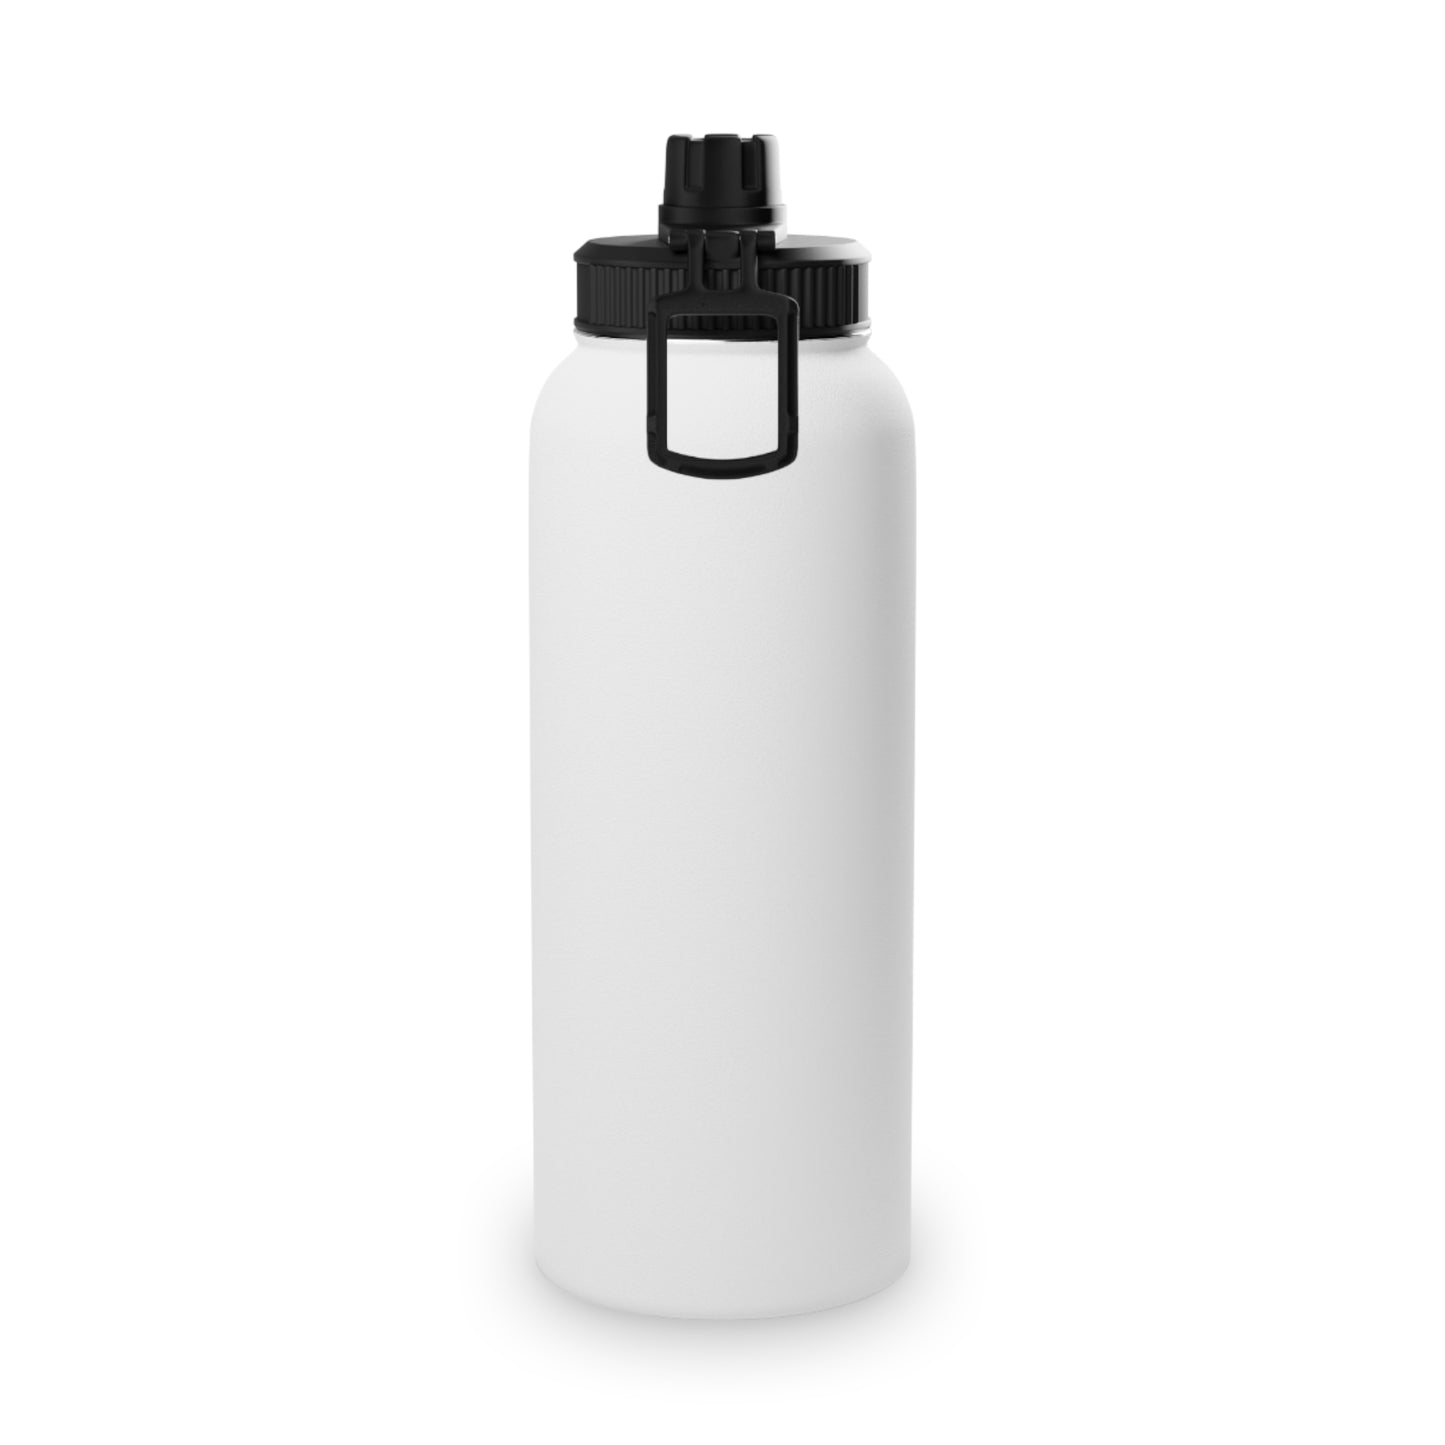 Dog & Pup Stainless Steel Water Bottle, Sports Lid